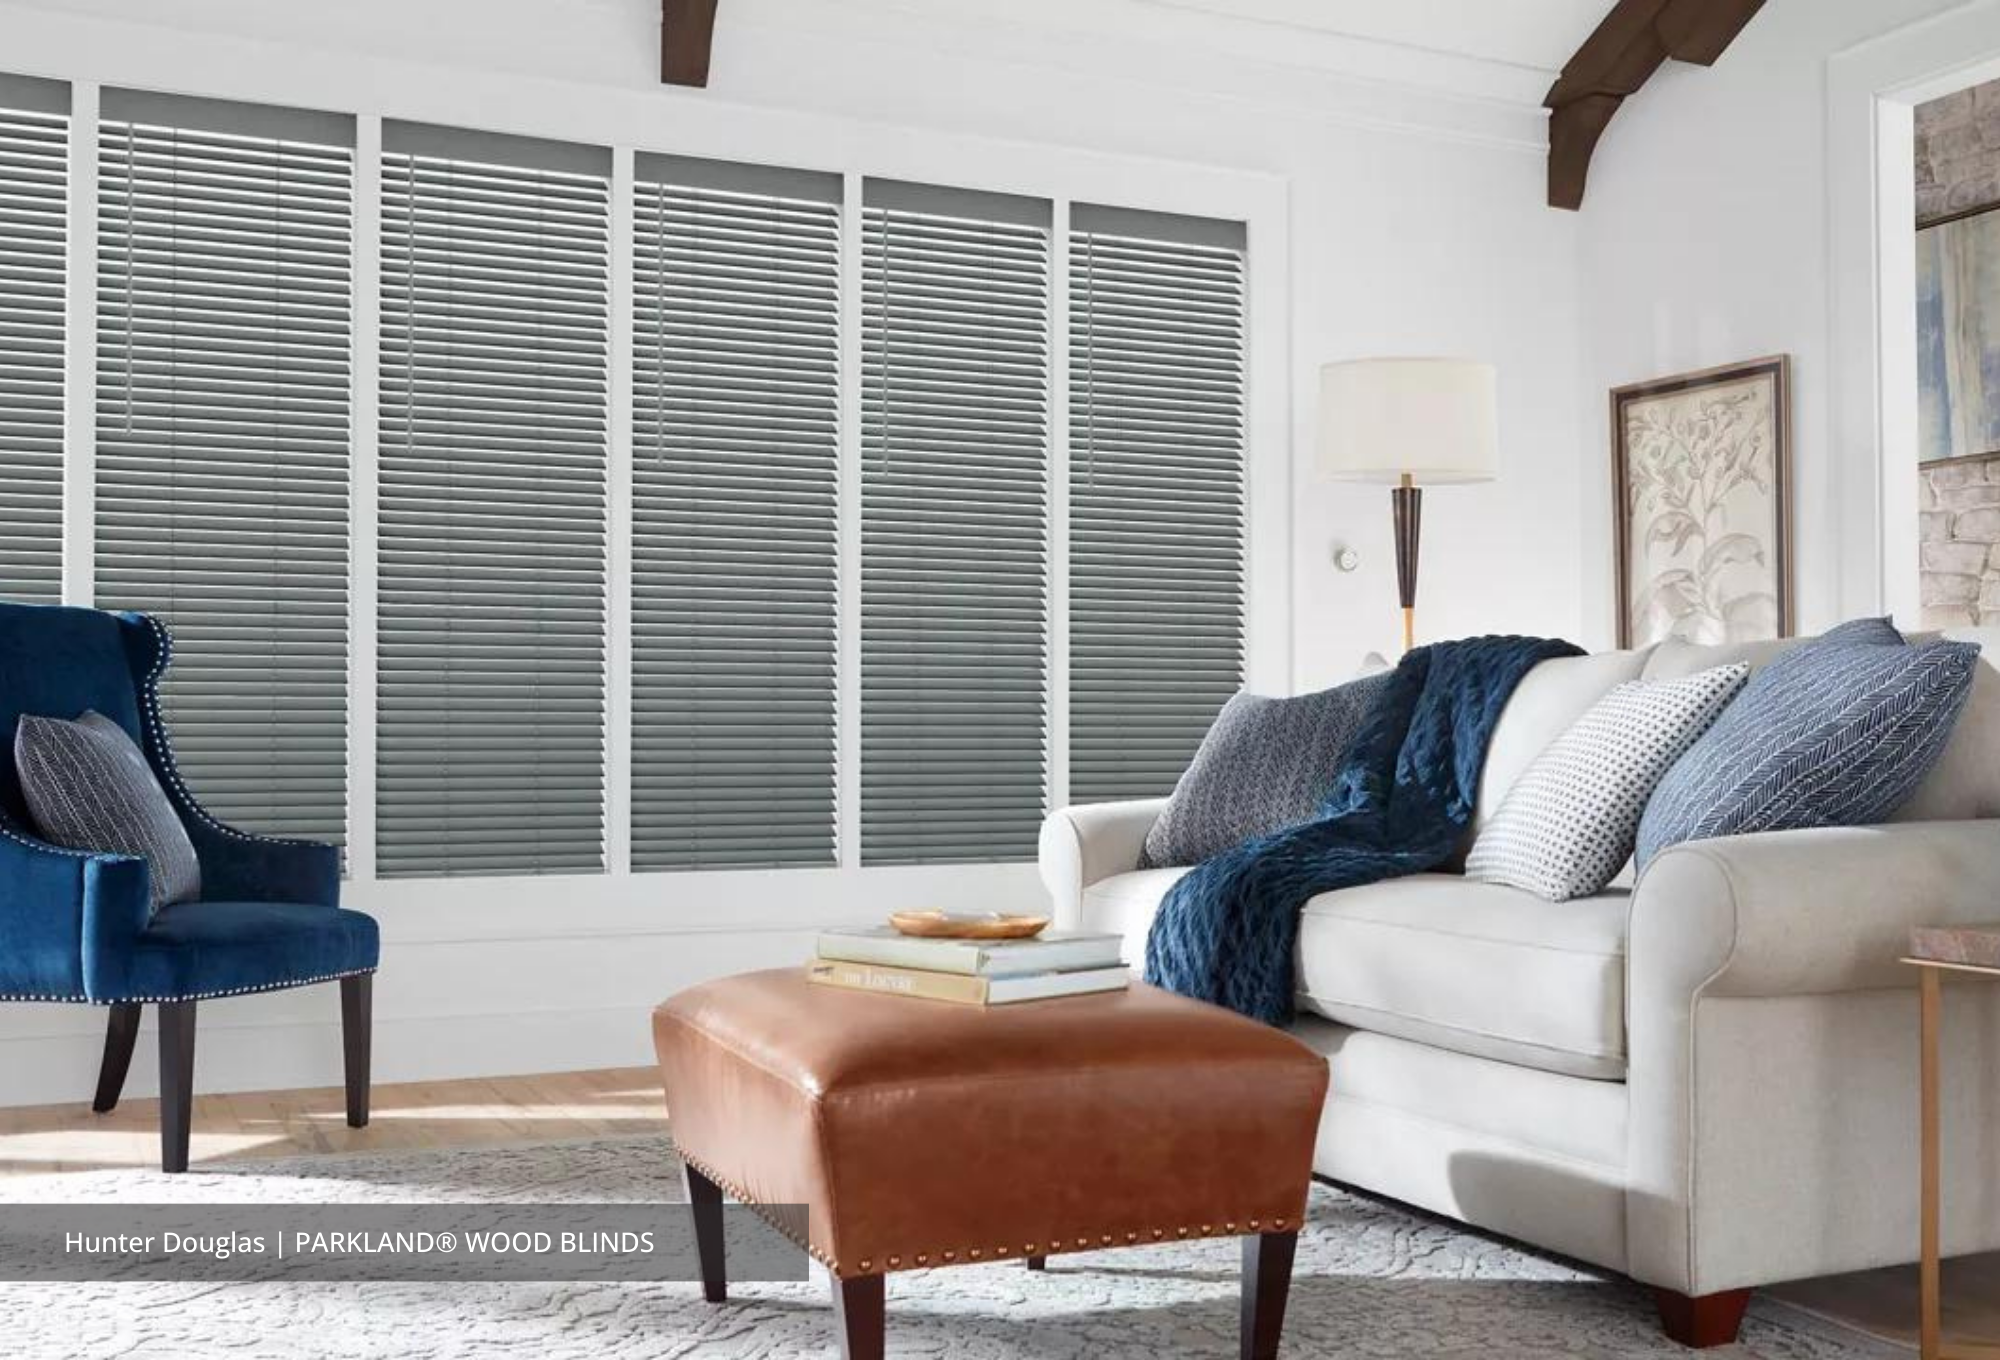 Effortless Shine: How to Clean Wooden Blinds Quickly and Effectively